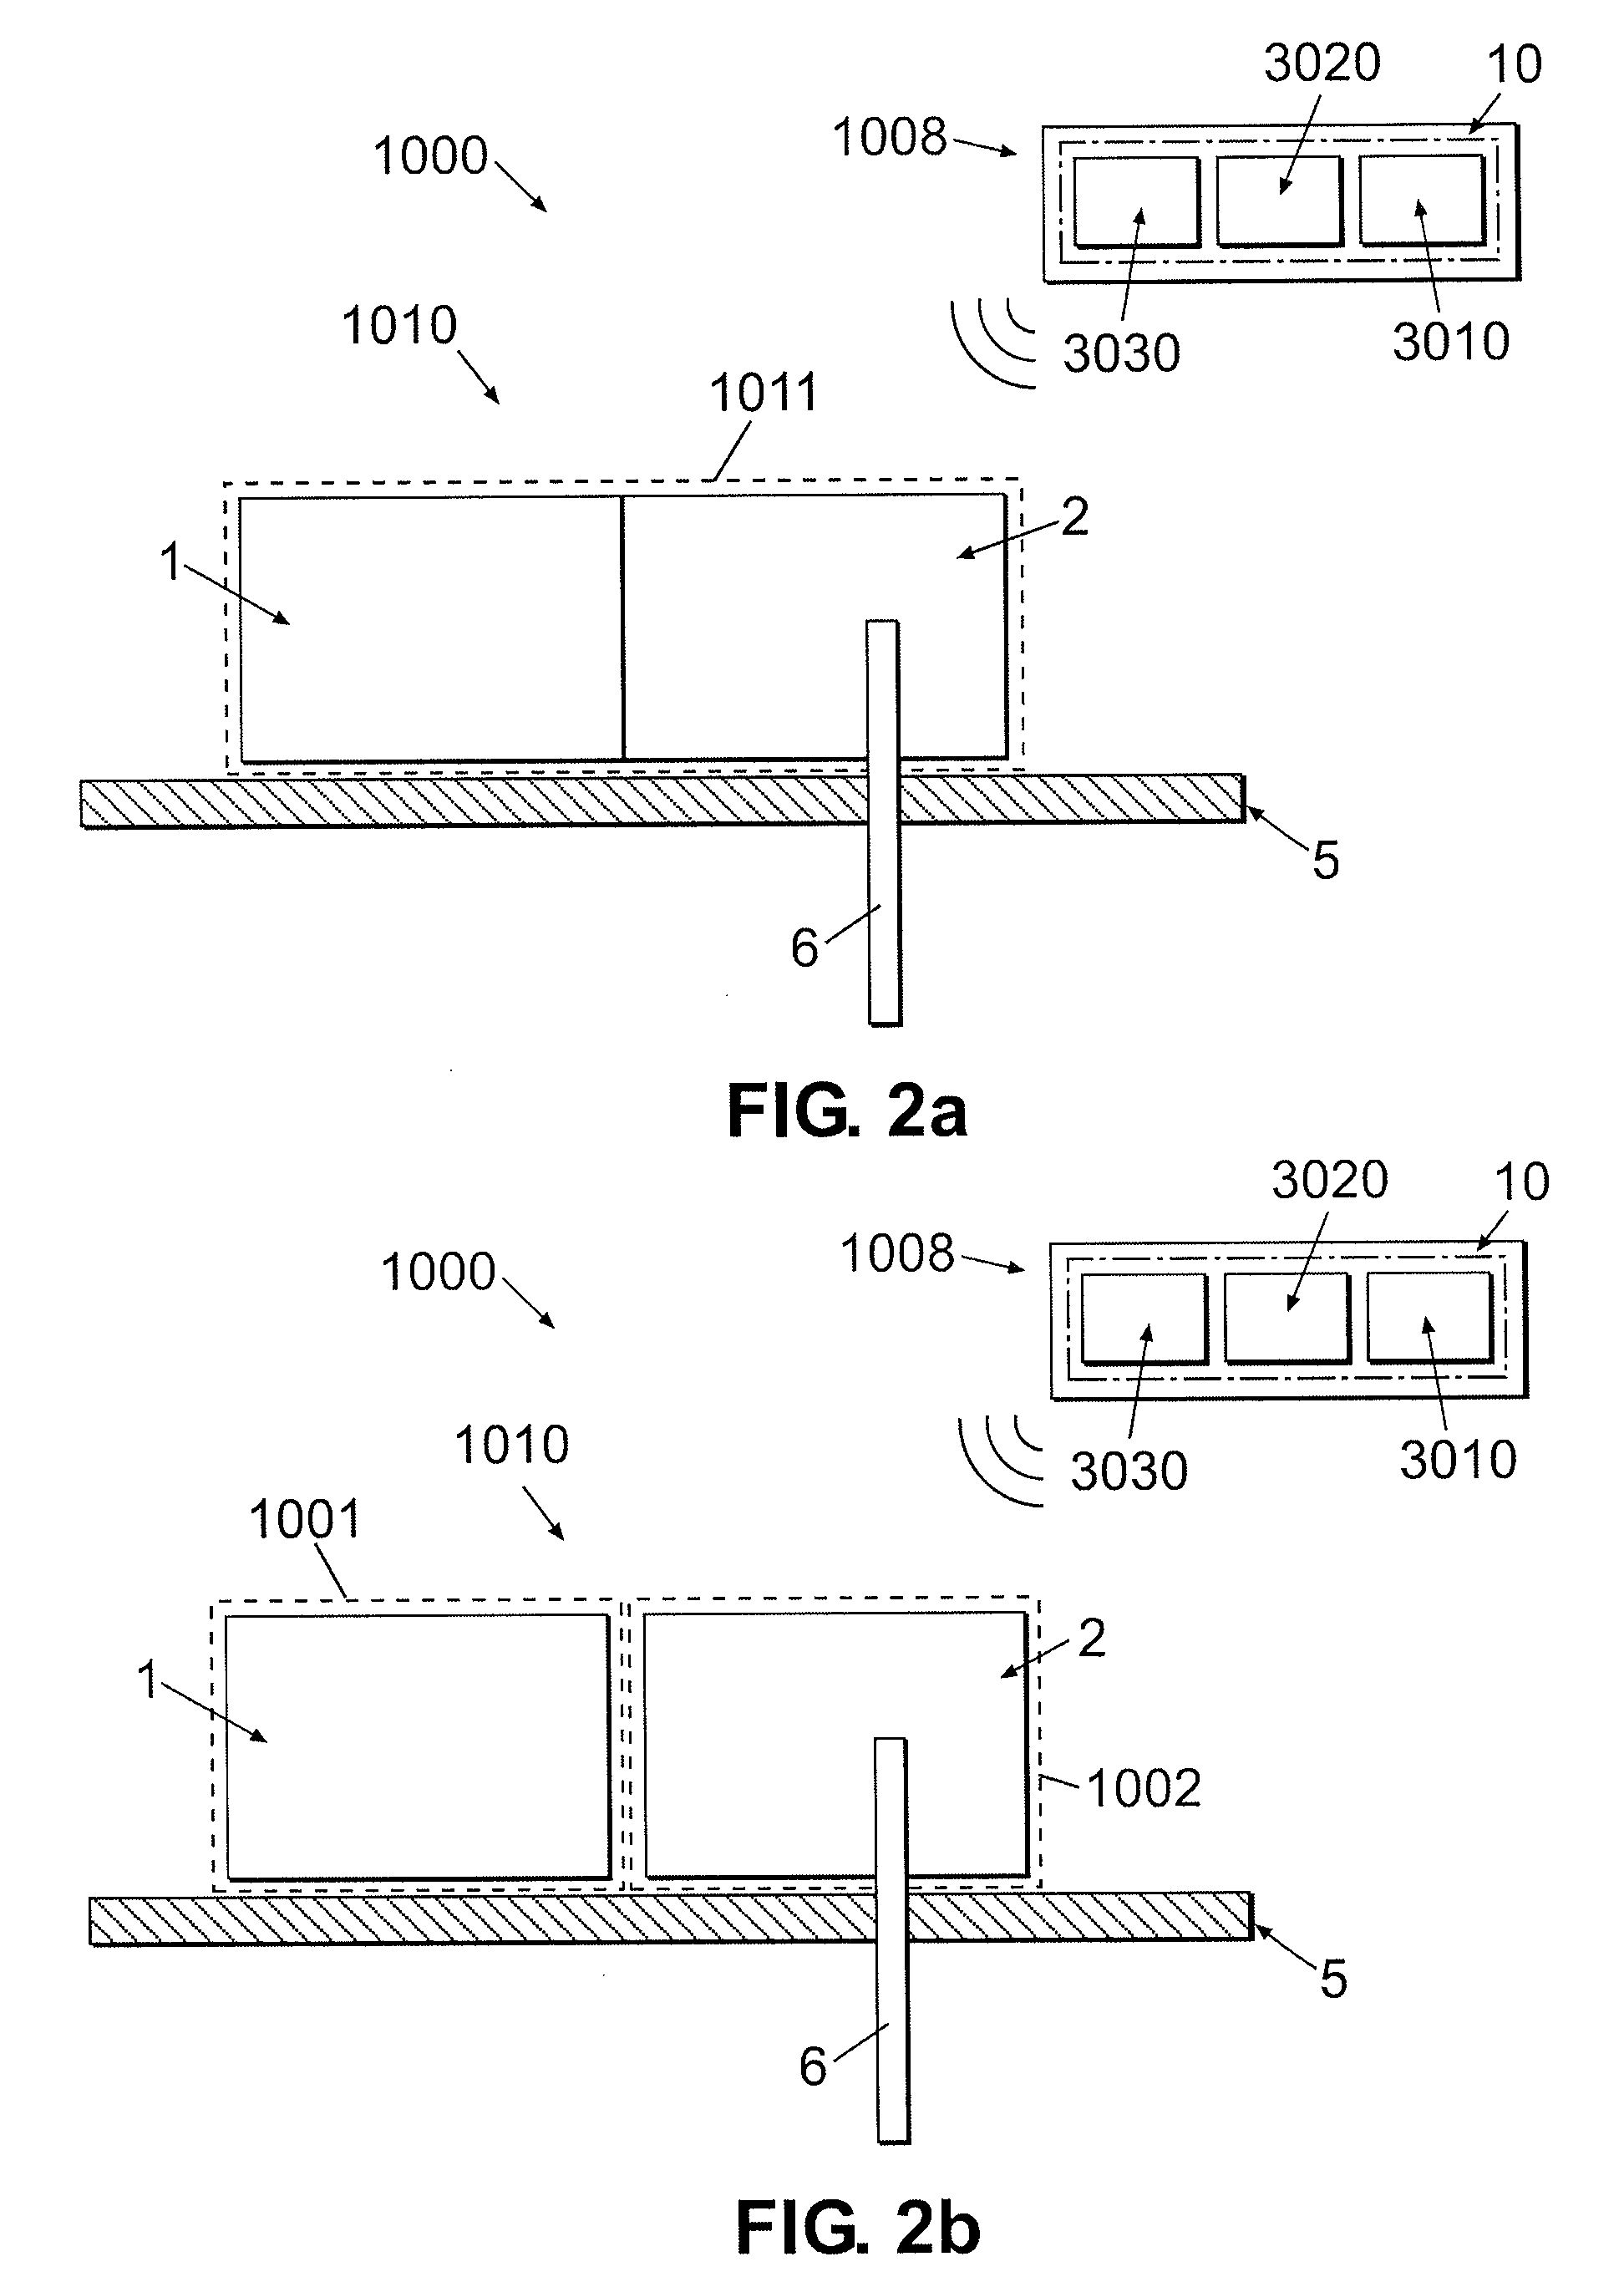 Method and Device for Assessing Carbohydrate-to-Insulin Ratio